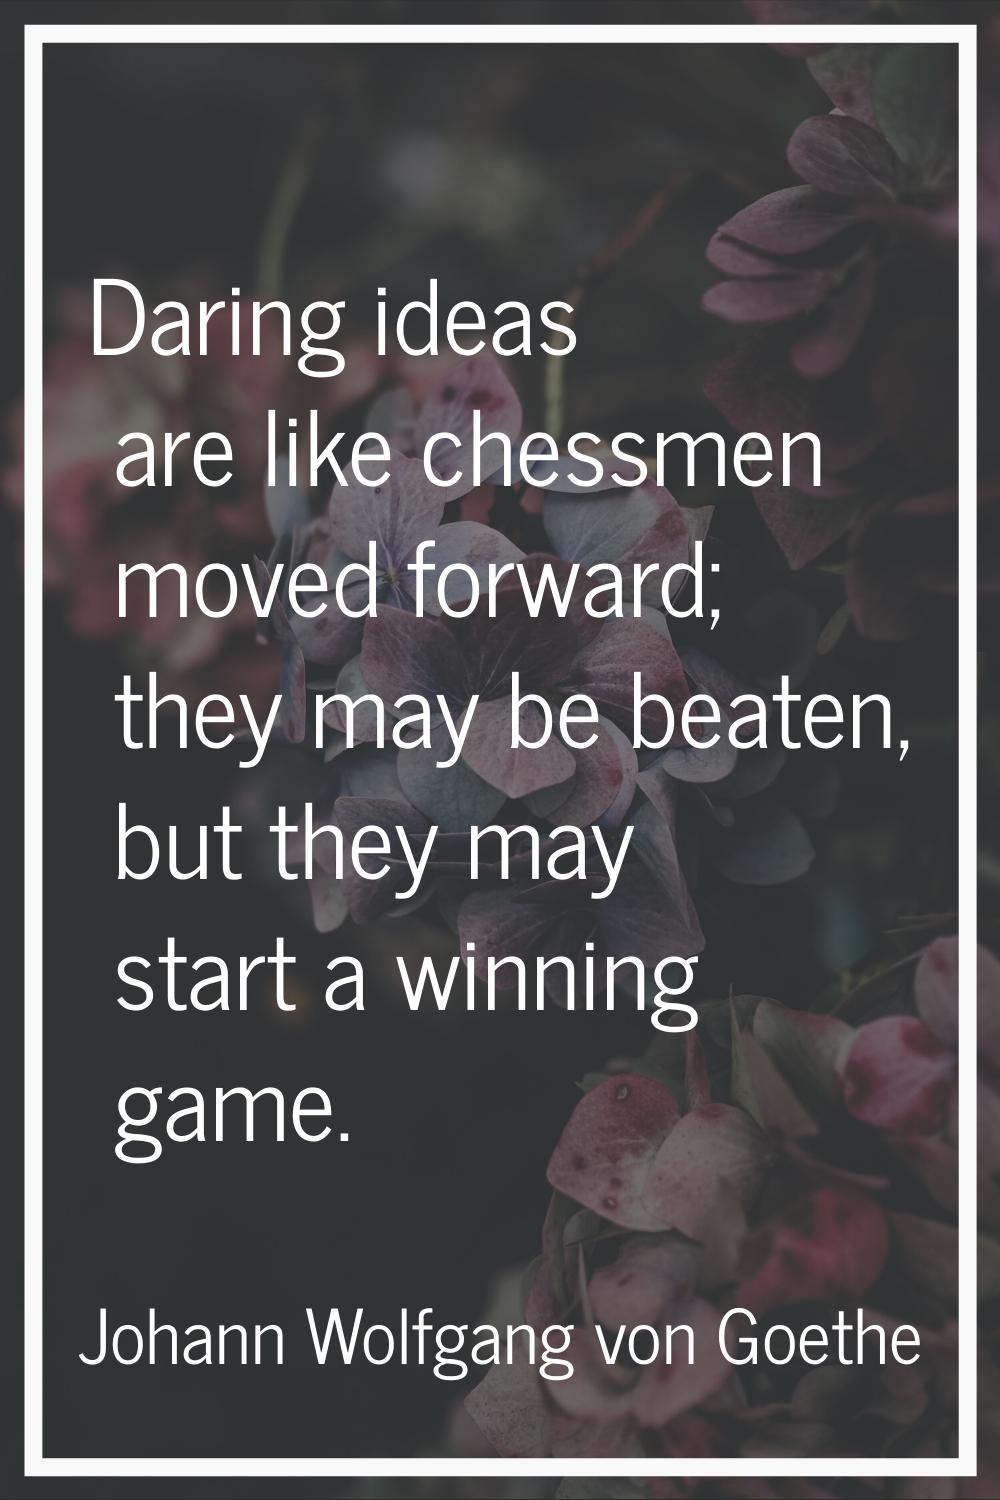 Daring ideas are like chessmen moved forward; they may be beaten, but they may start a winning game